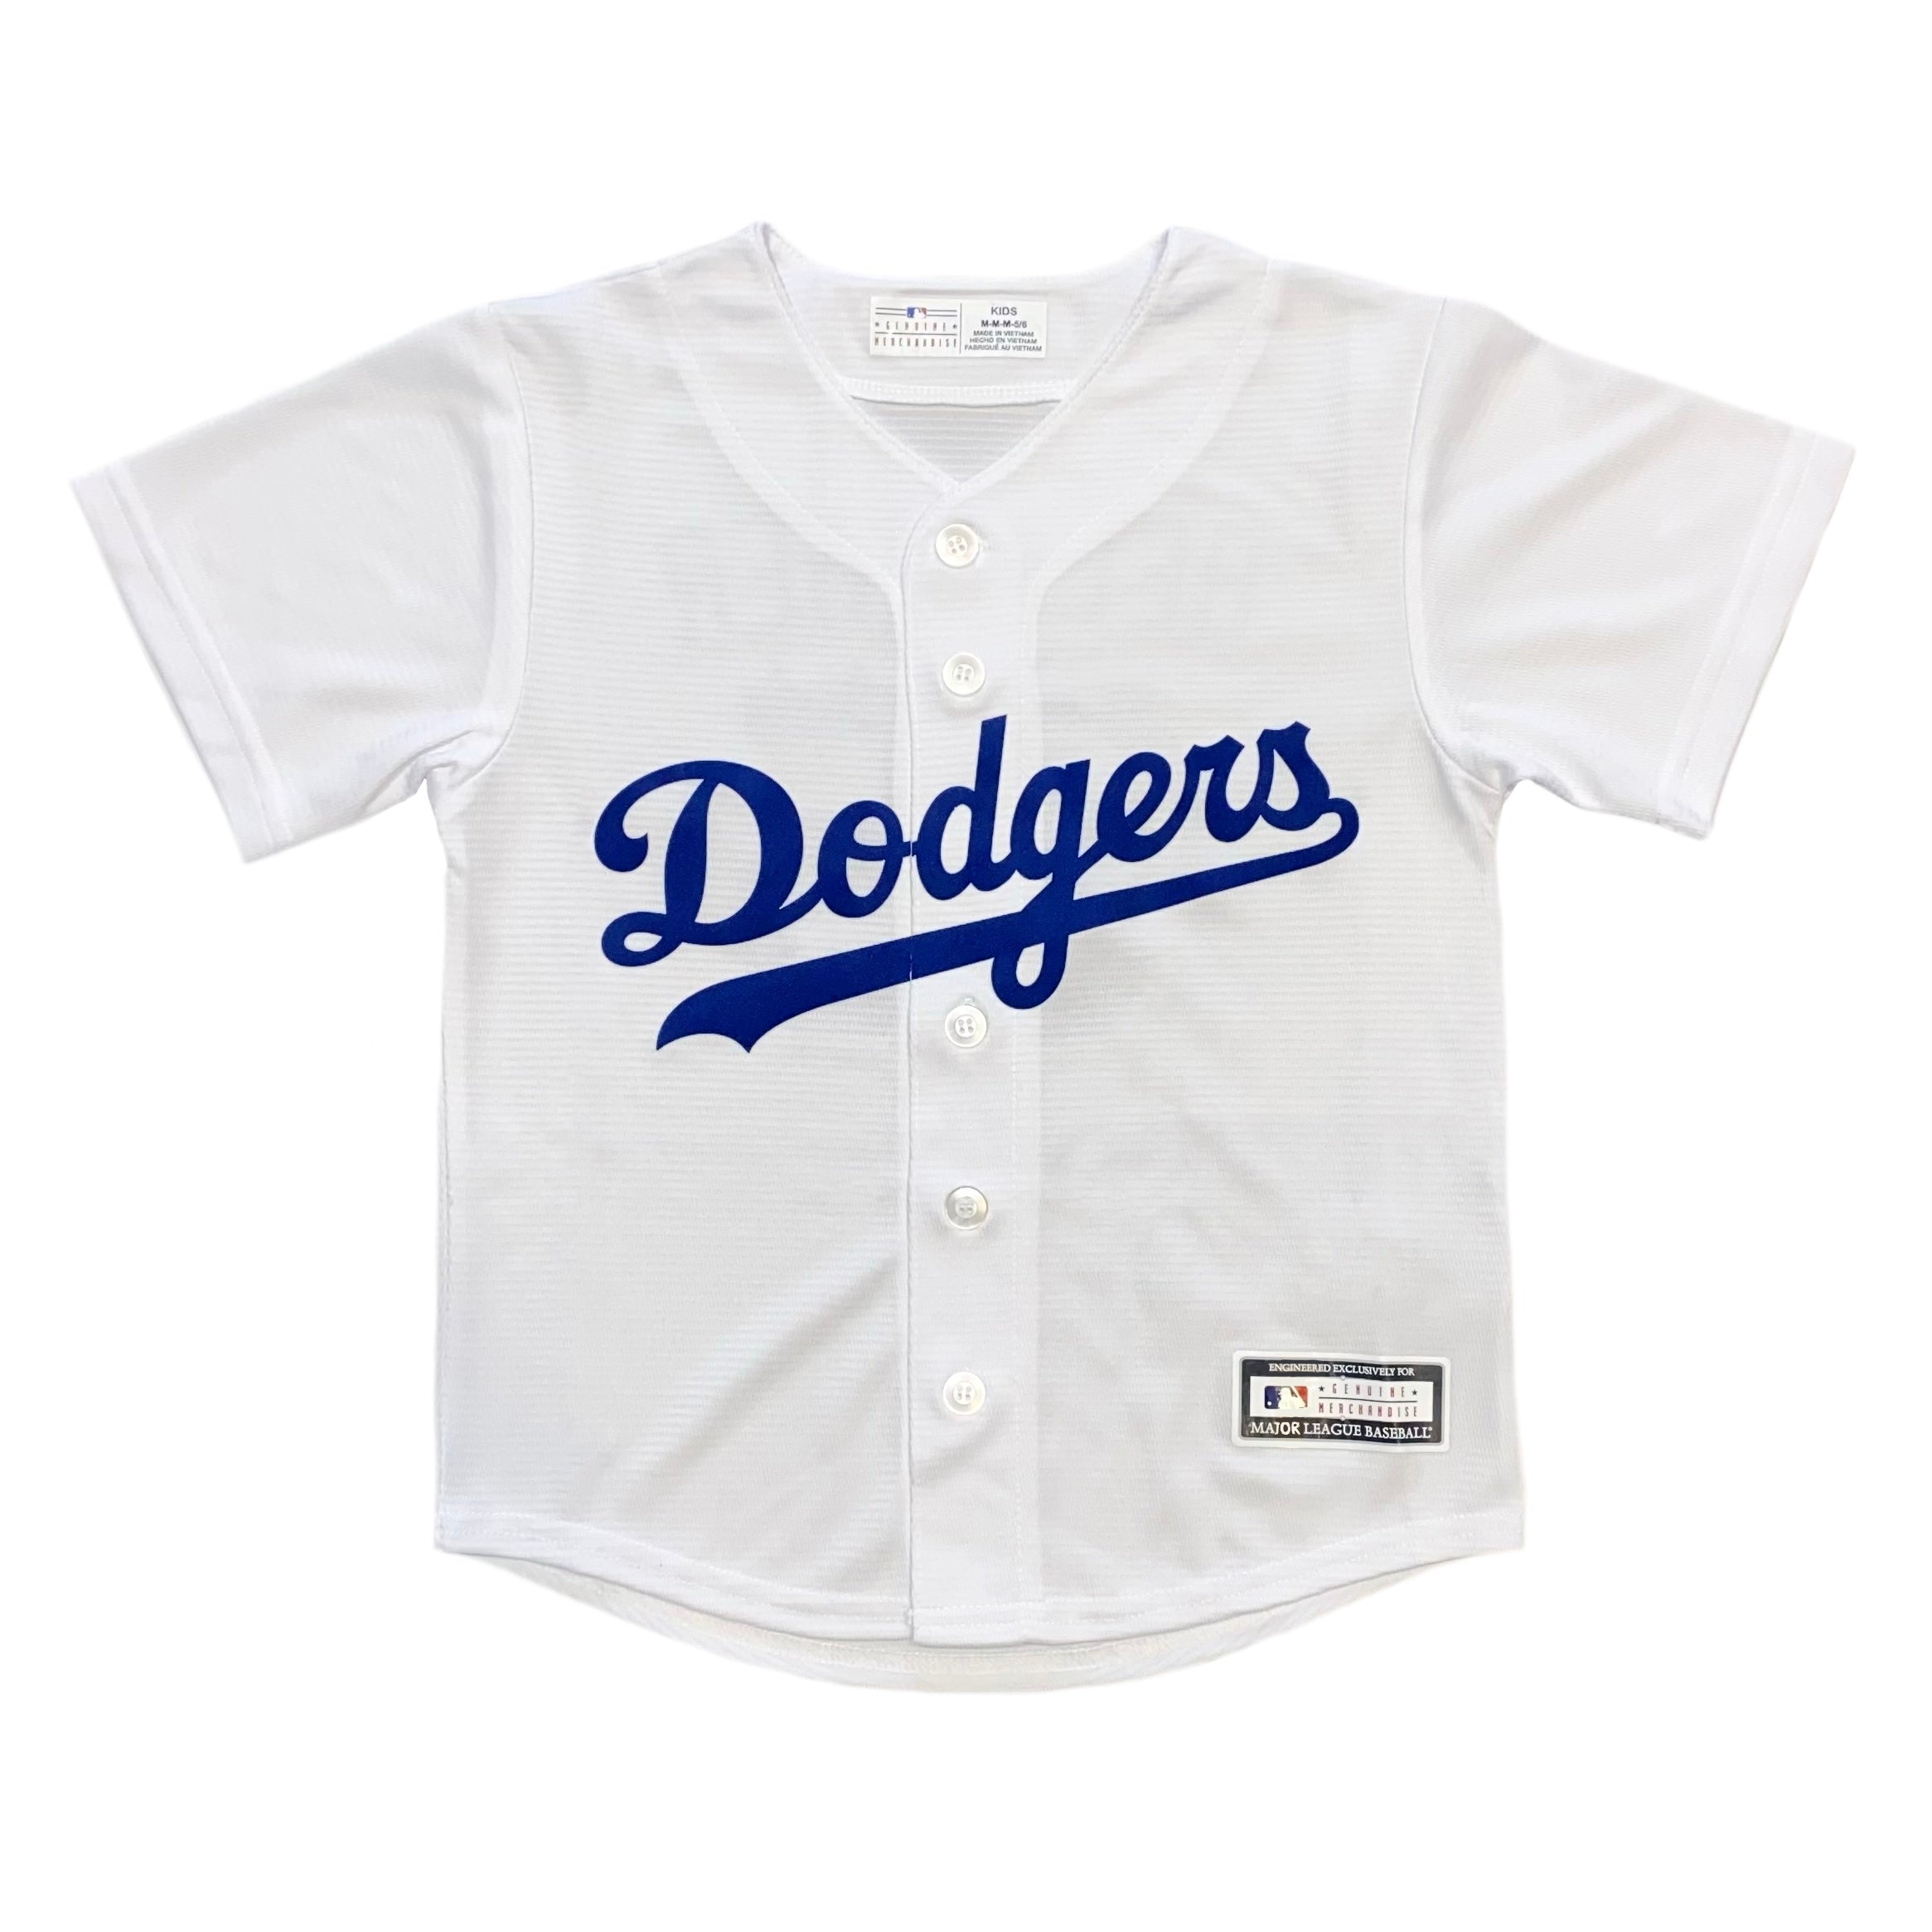 Nike LA Los Angeles Dodgers MLB Blue Button Up Jersey Youth Size L